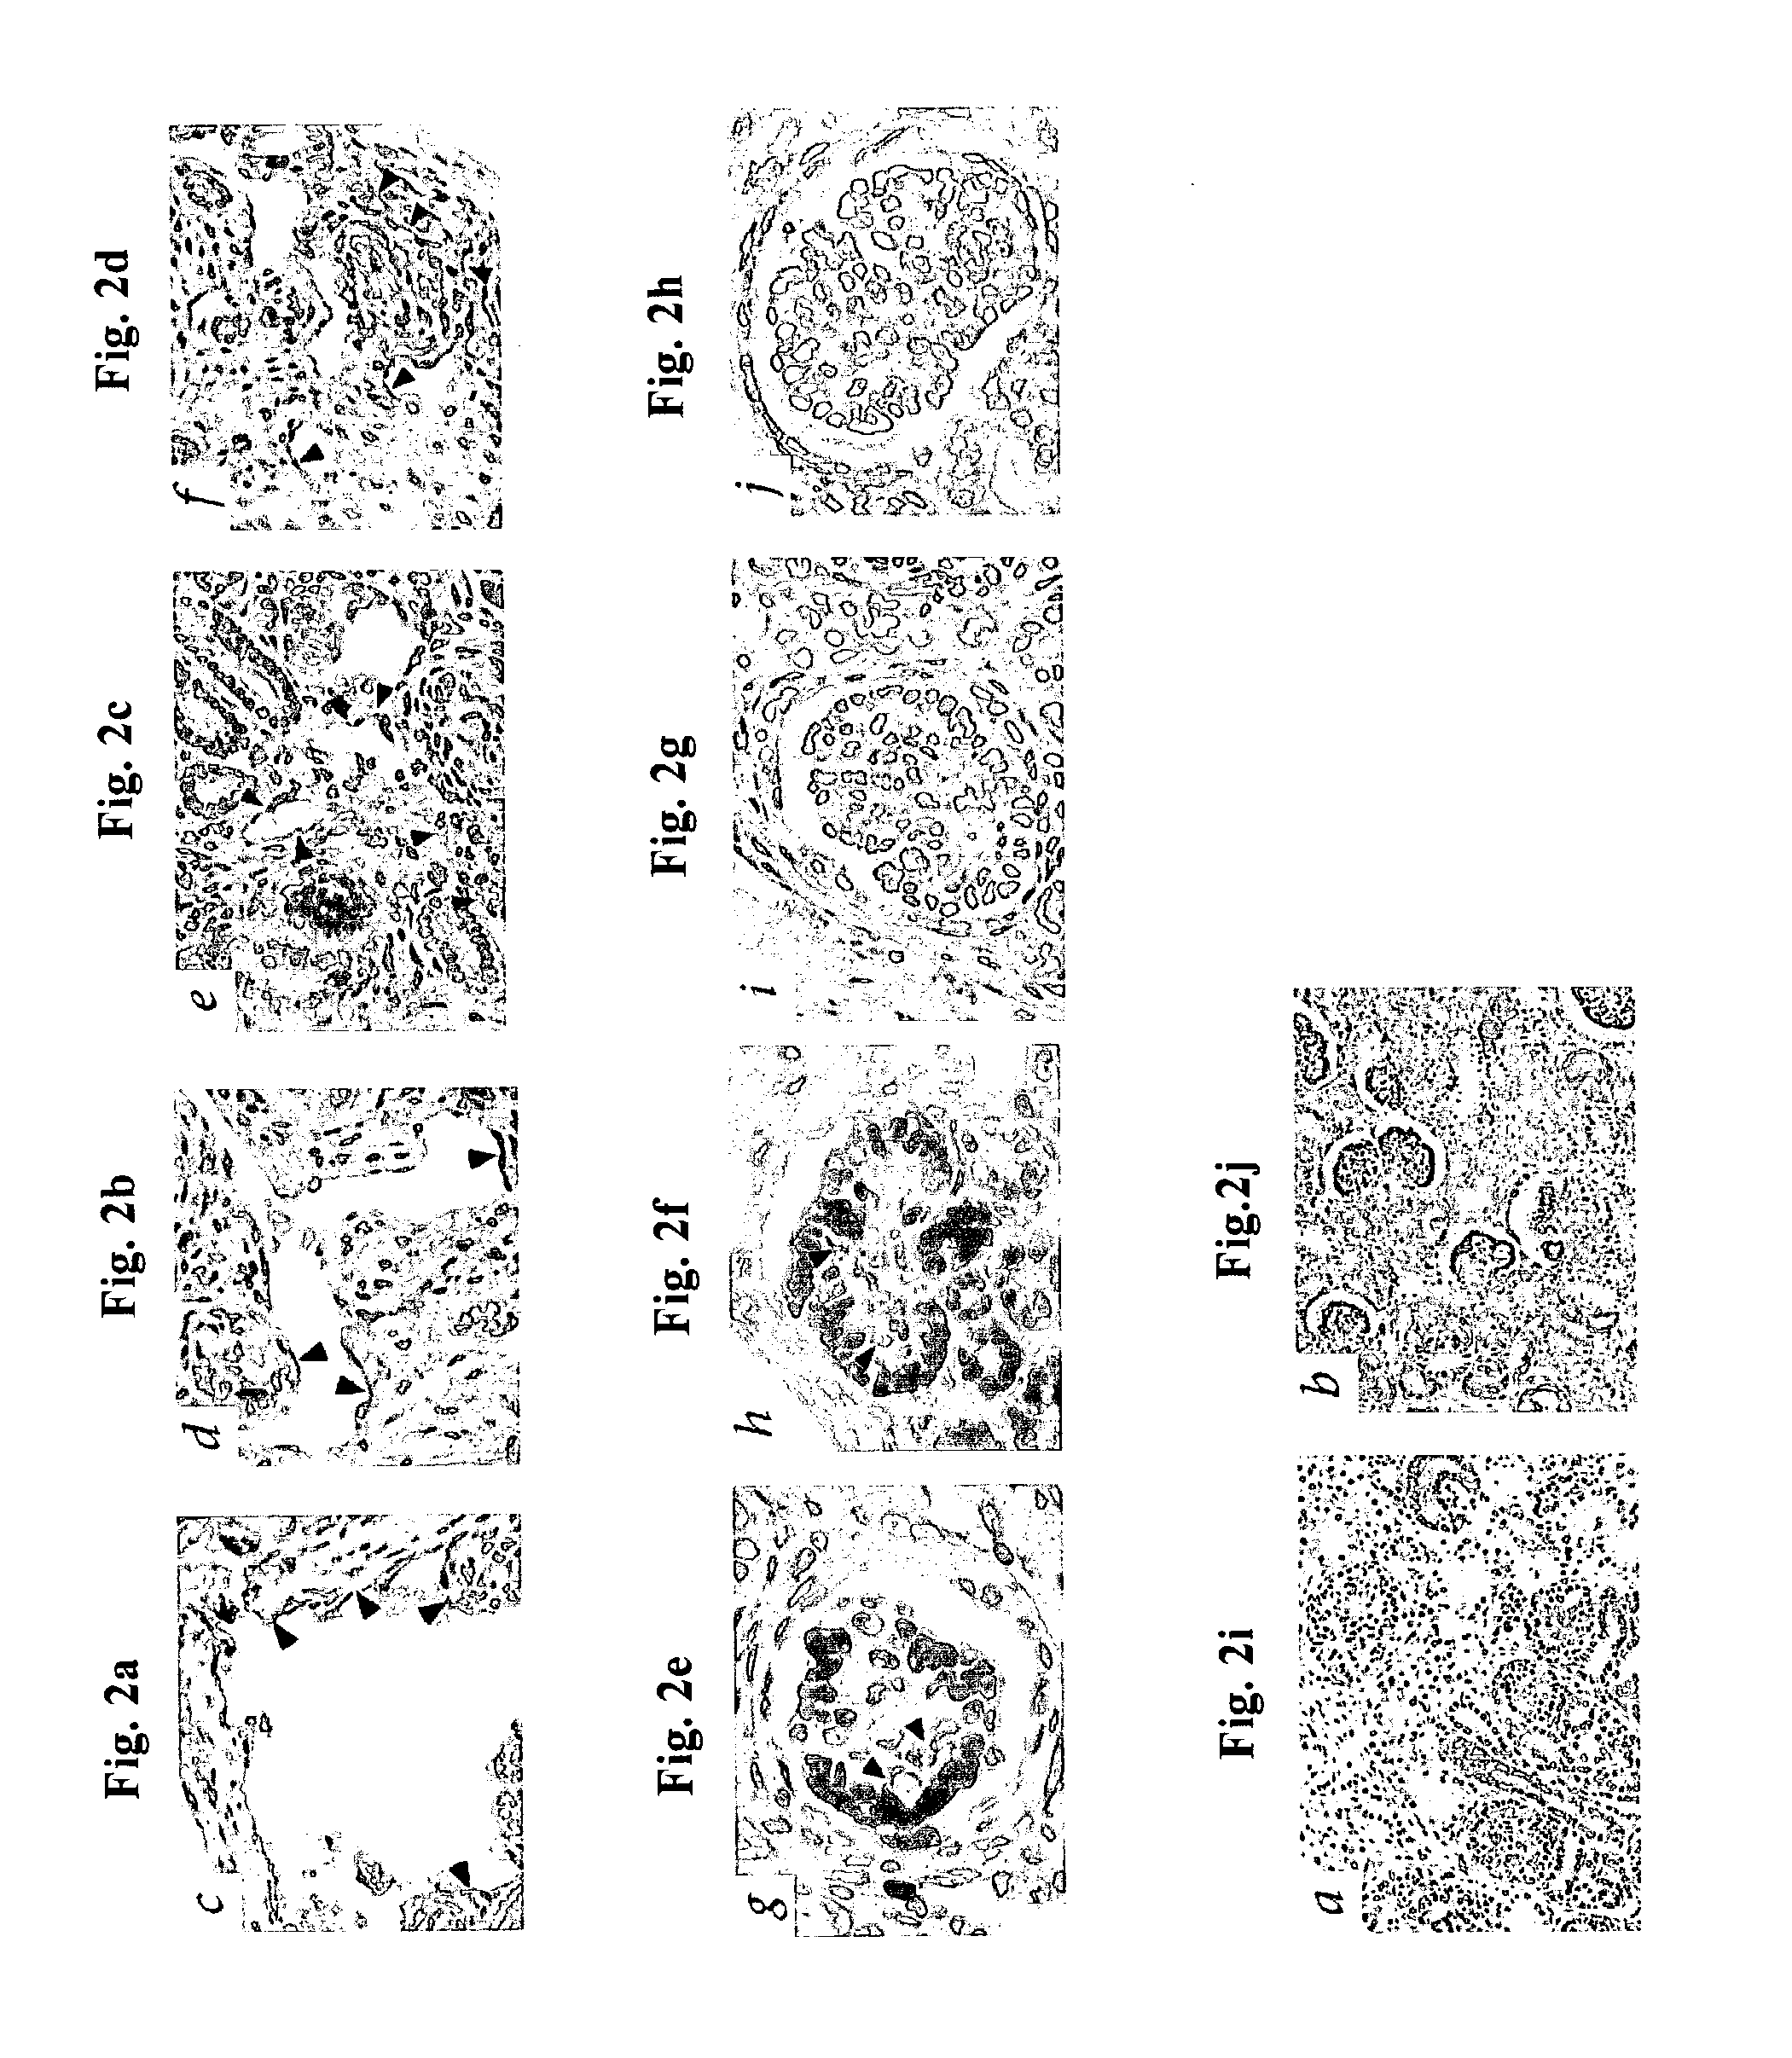 Methods of treating disease by transplantation of developing allogeneic or xenogeneic organs or tissues